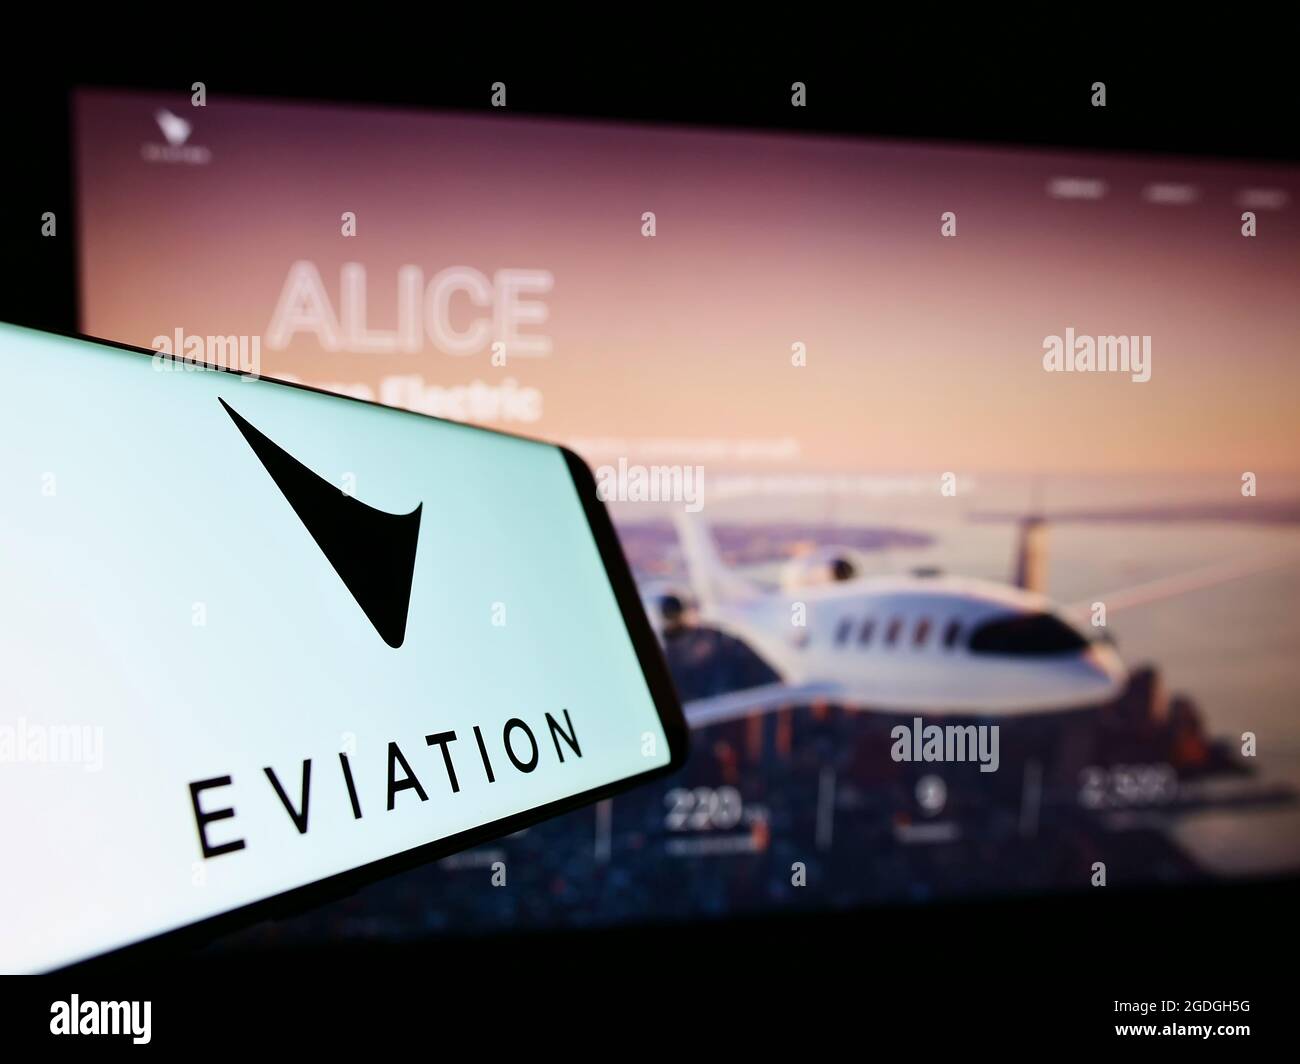 Mobile phone with logo of electric aircraft company Eviation Aircraft Ltd. on screen in front of website. Focus on center-right of phone display. Stock Photo